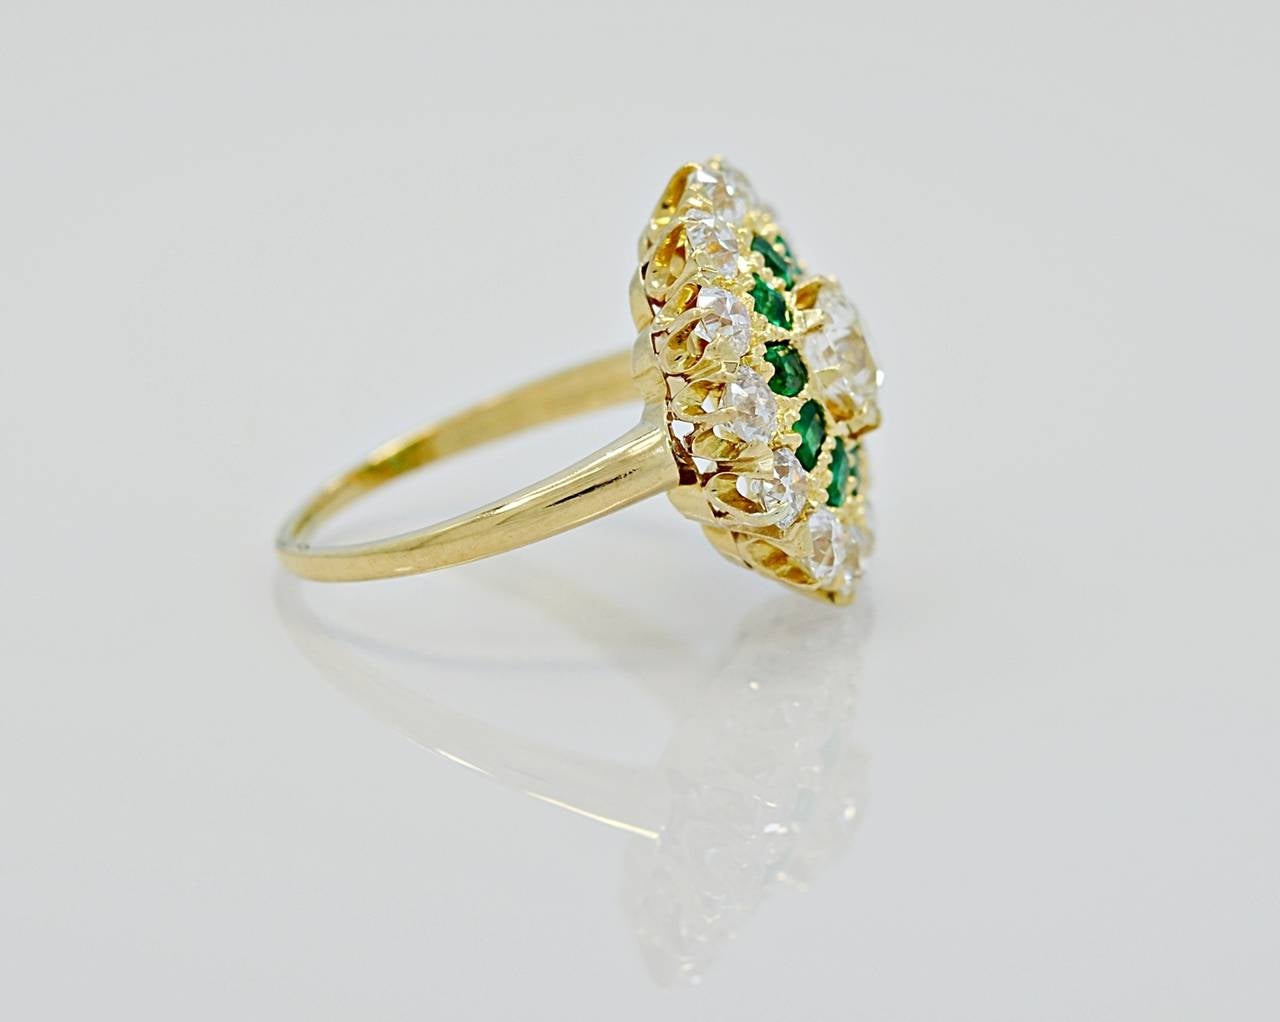 J35080

This antique Edwardian fashion ring is of extreme rarity featuring a .60ct. apx. center round European cut diamond with 1.30ct. apx. melee and .70ct. apx. of Columbian emeralds. The center diamond is SI2 in clarity and G-H color. The